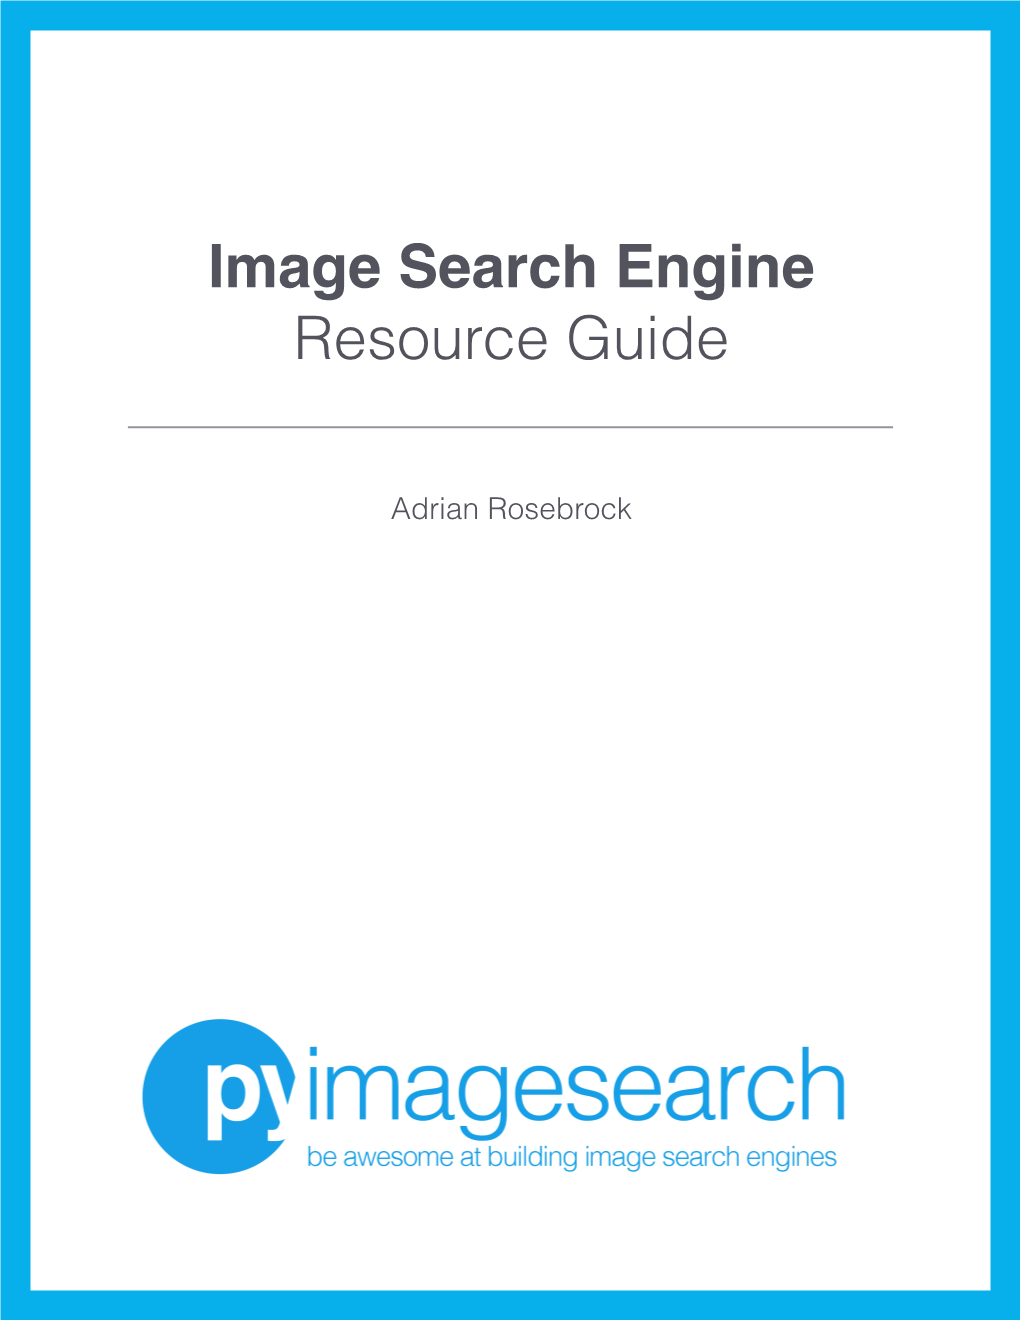 Image Search Engine Resource Guide